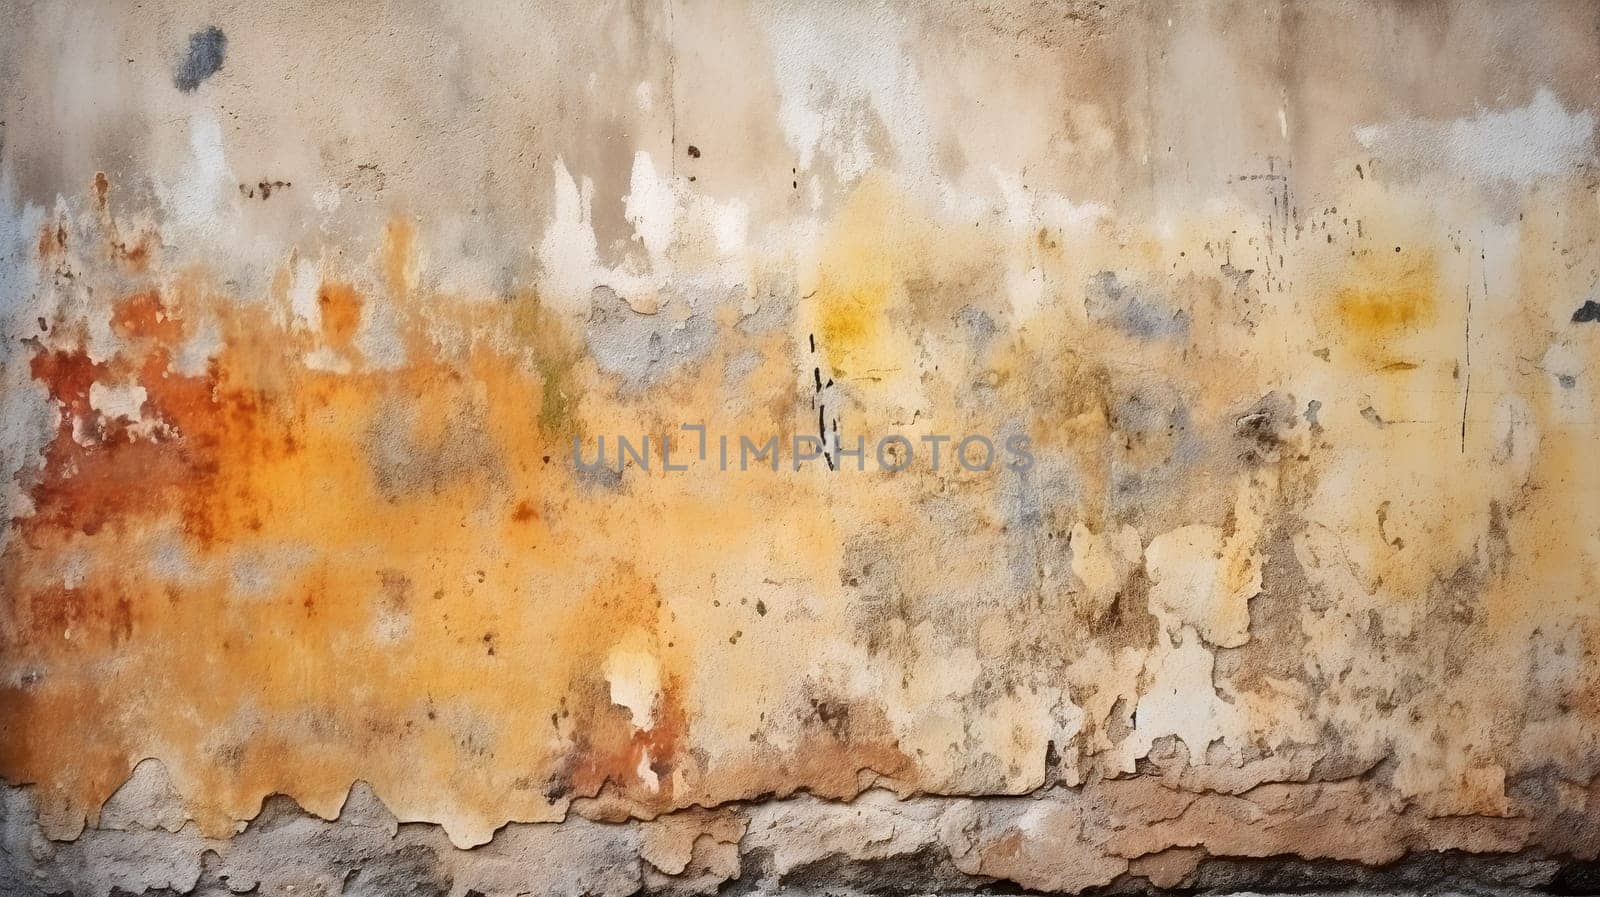 Rusted Wall With Yellow and Orange Paint by chrisroll